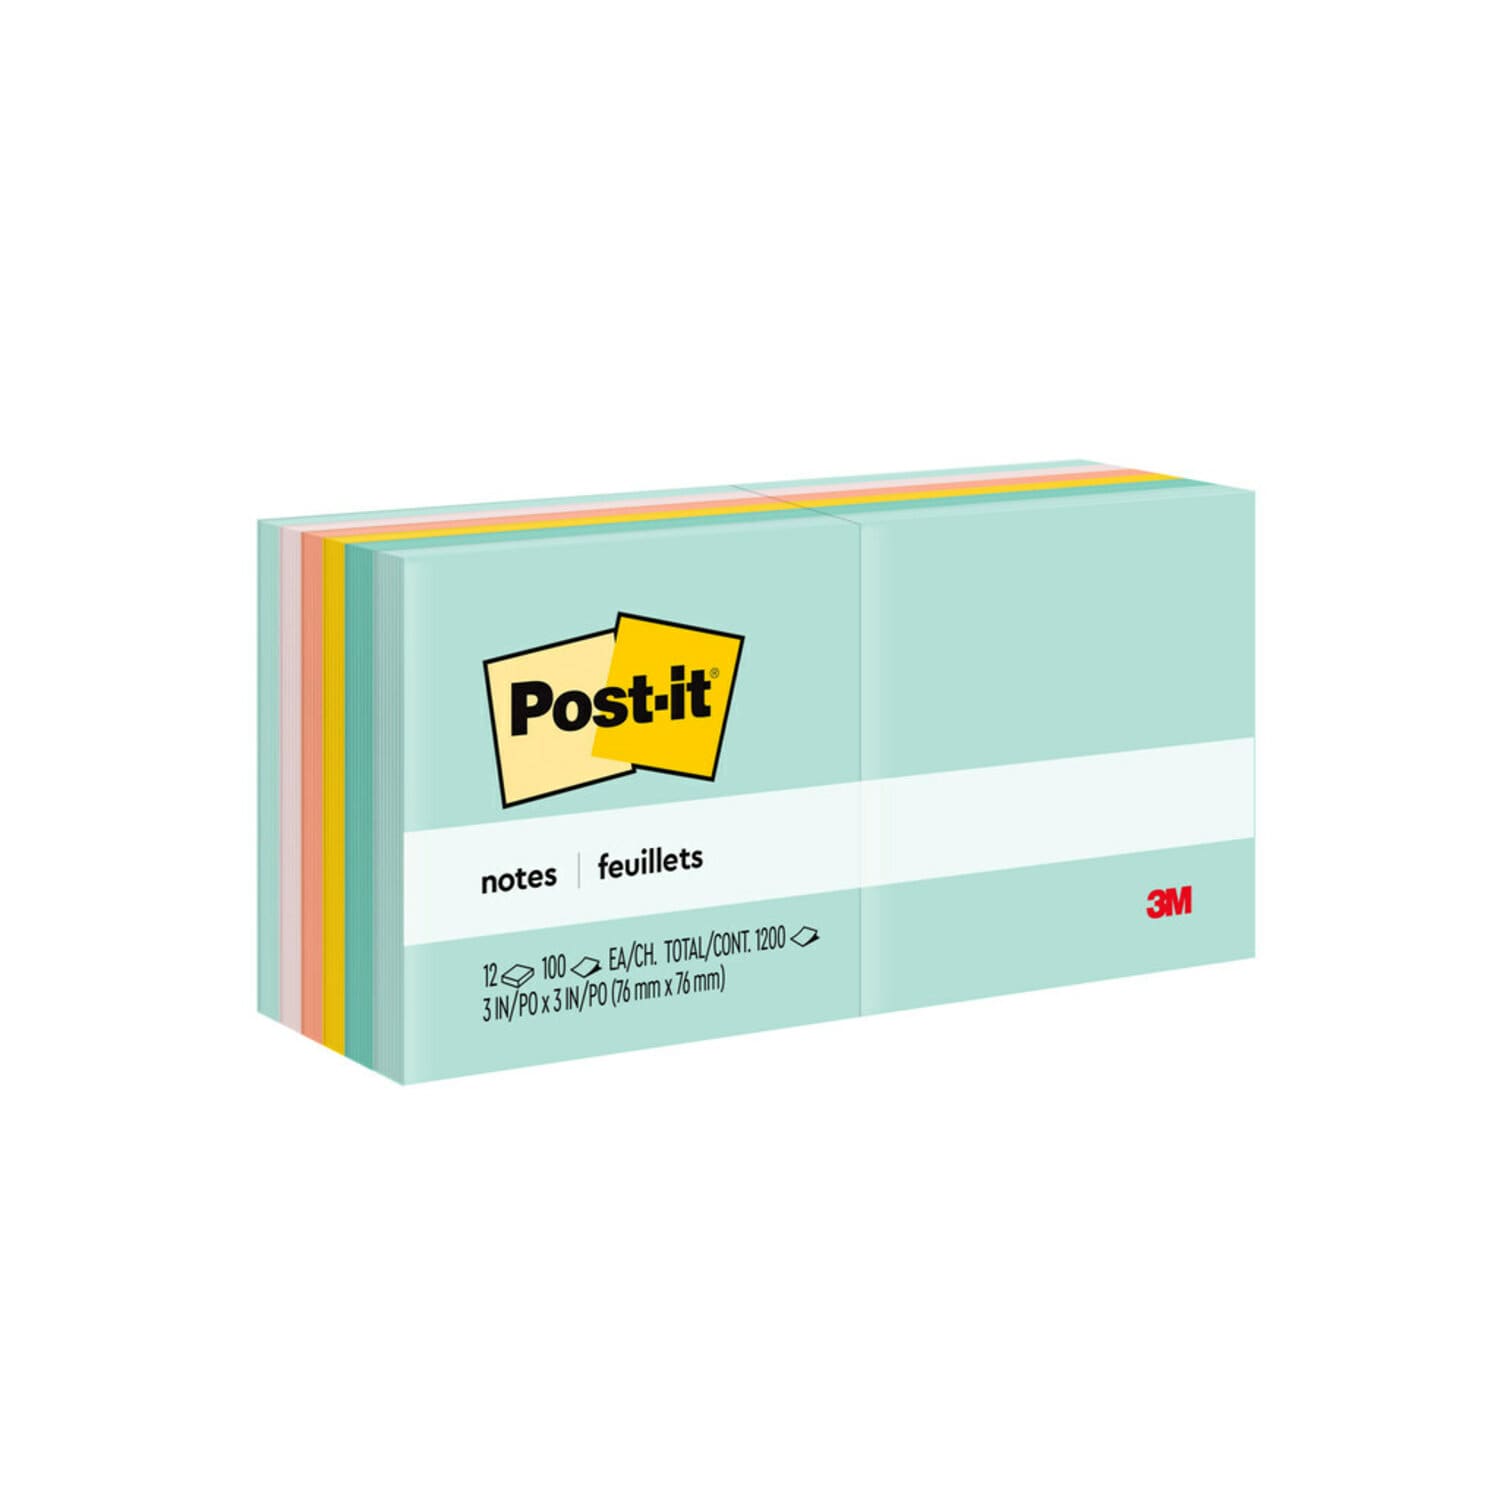 7100243051 - Post-it Notes 654-AST, 3 in x 3 in (76 mm x 76 mm) Marseille colors